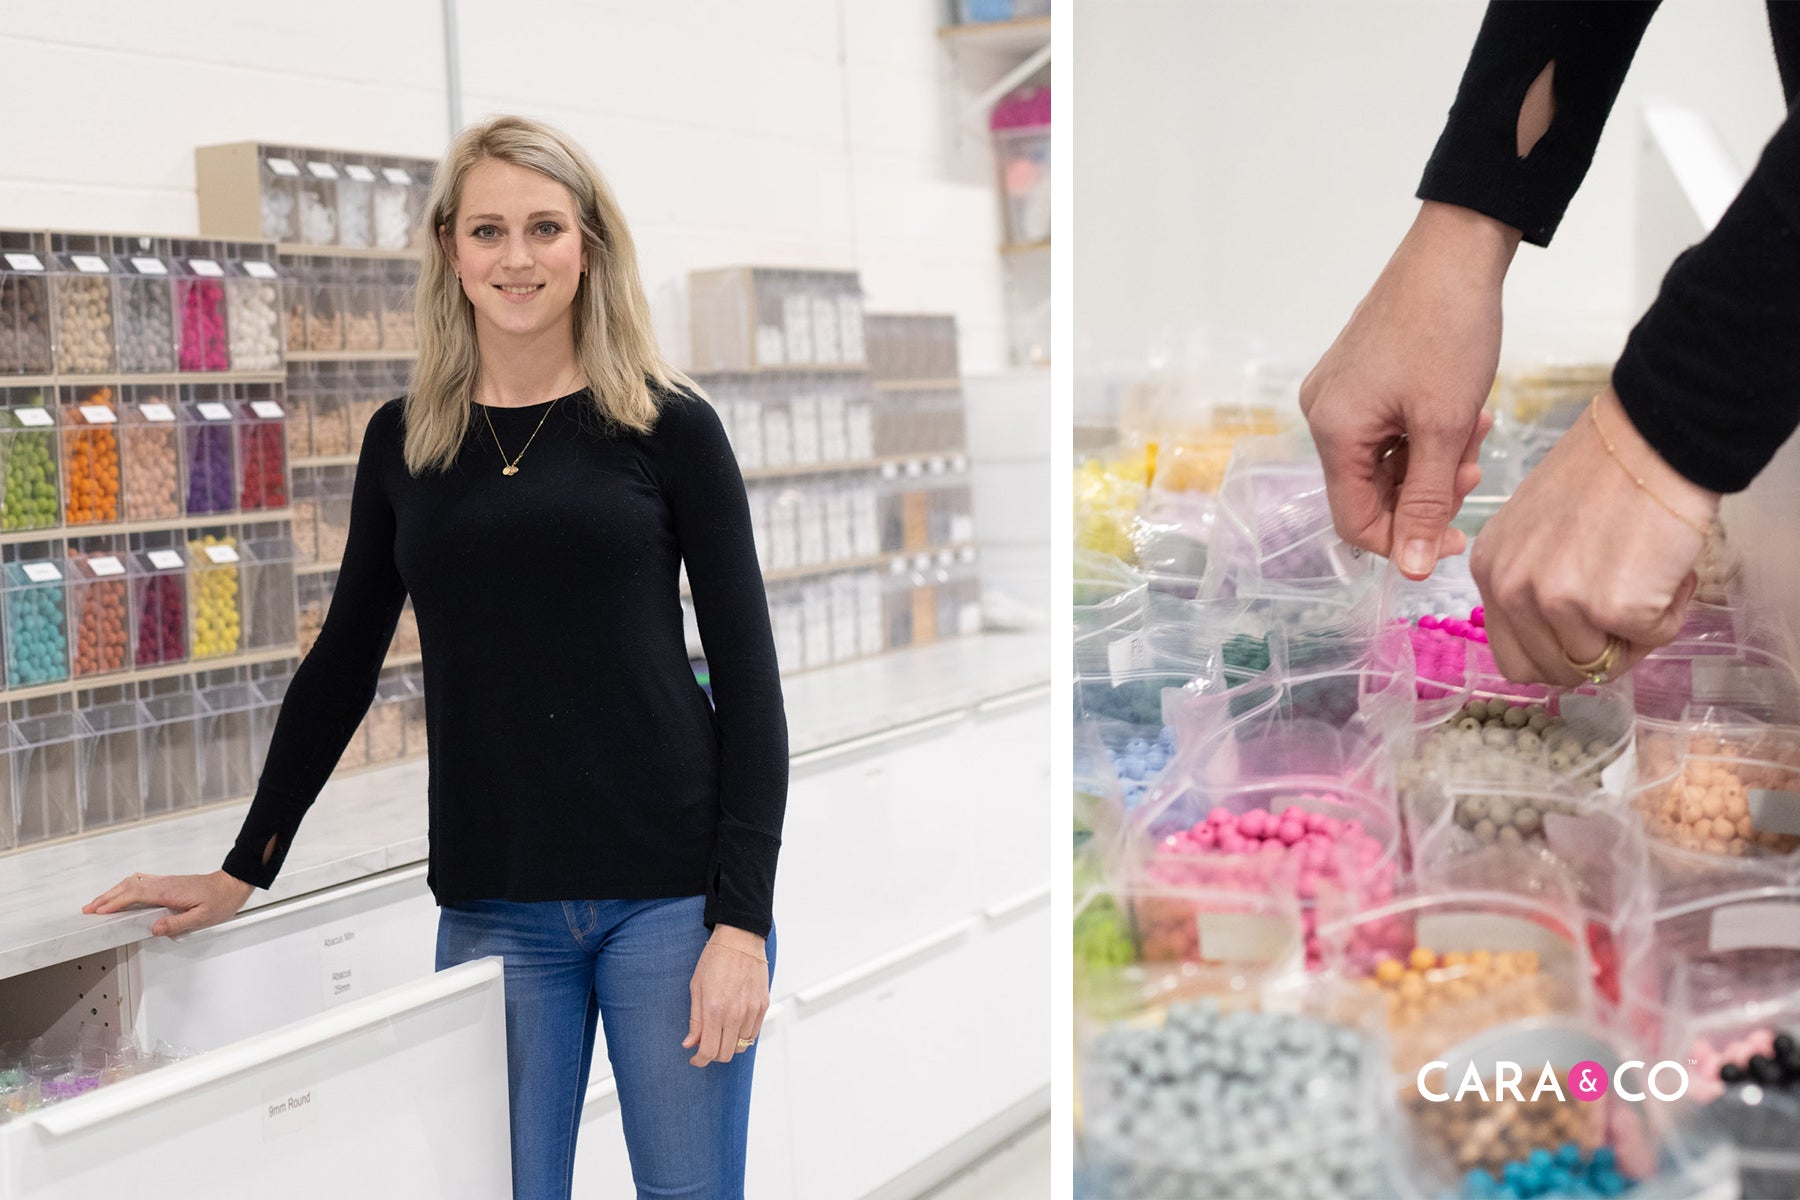 How to organize your small shop supplies - Cara & Co - Blog post